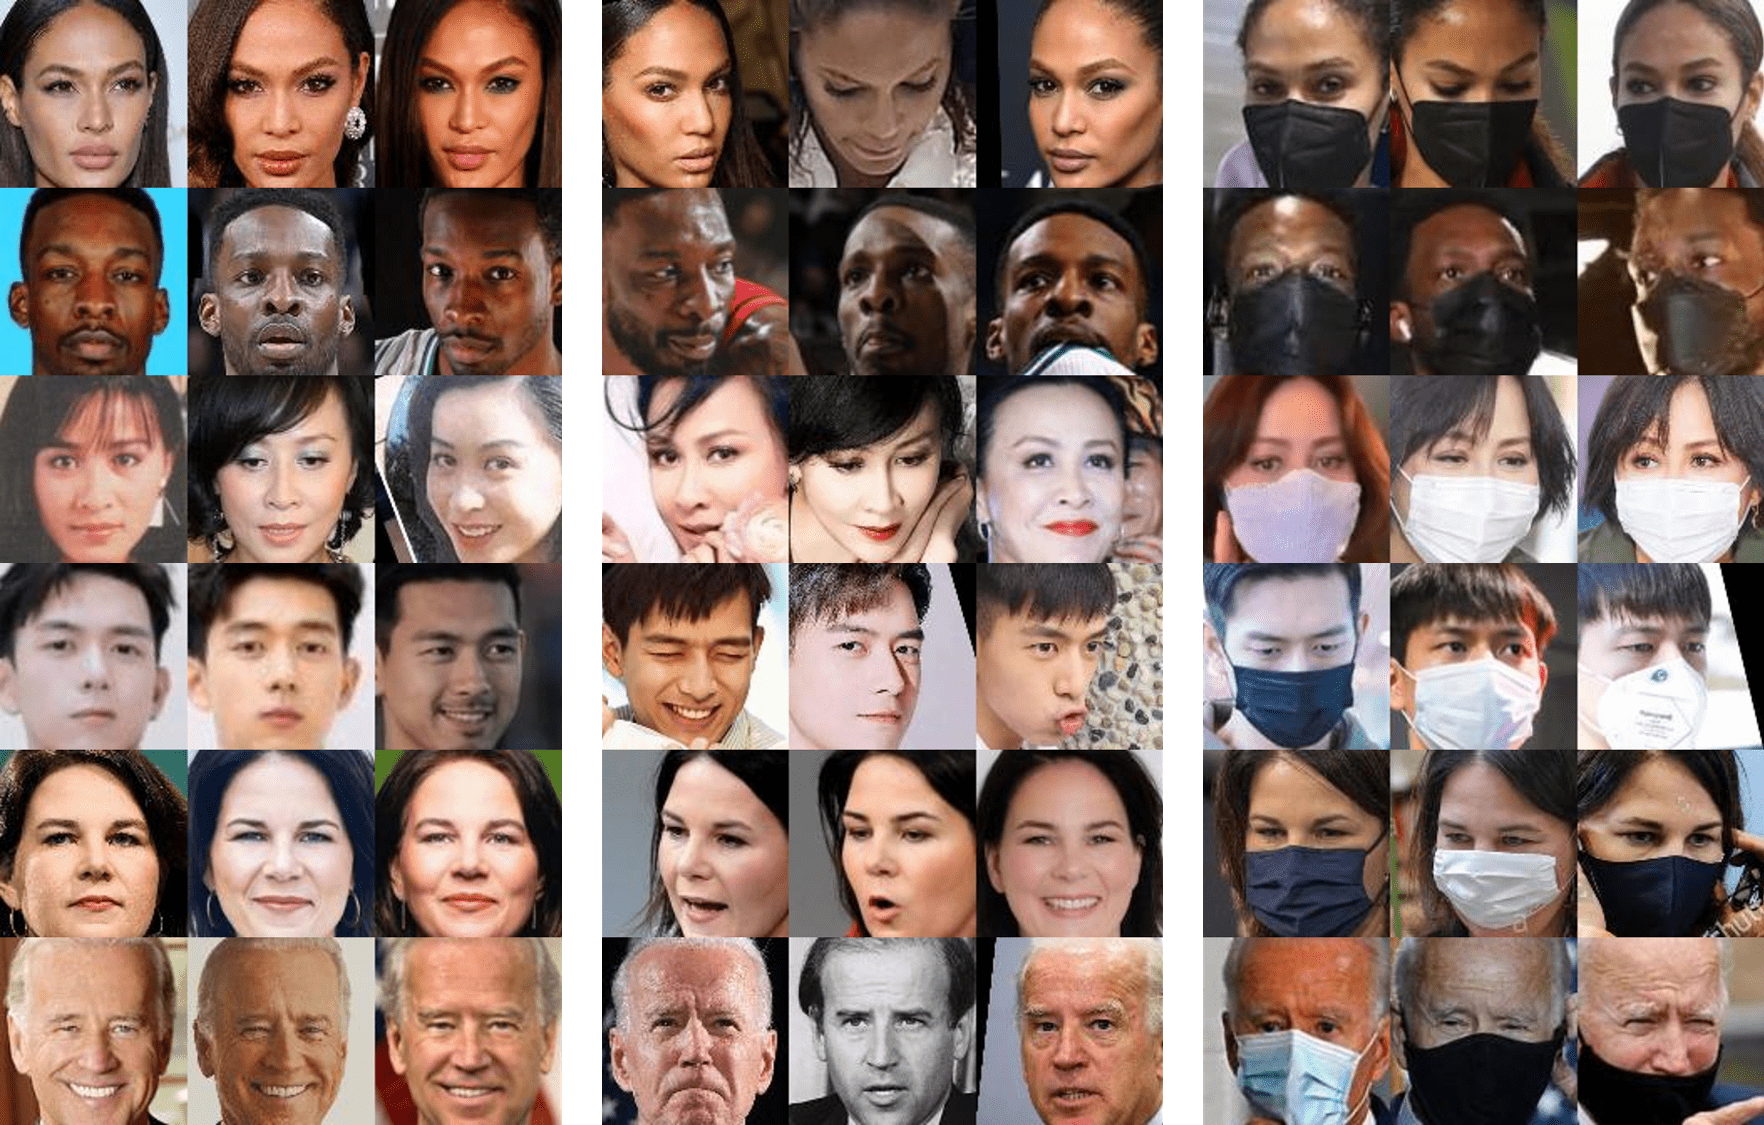 different famous people showing different facial emotions with and without masks